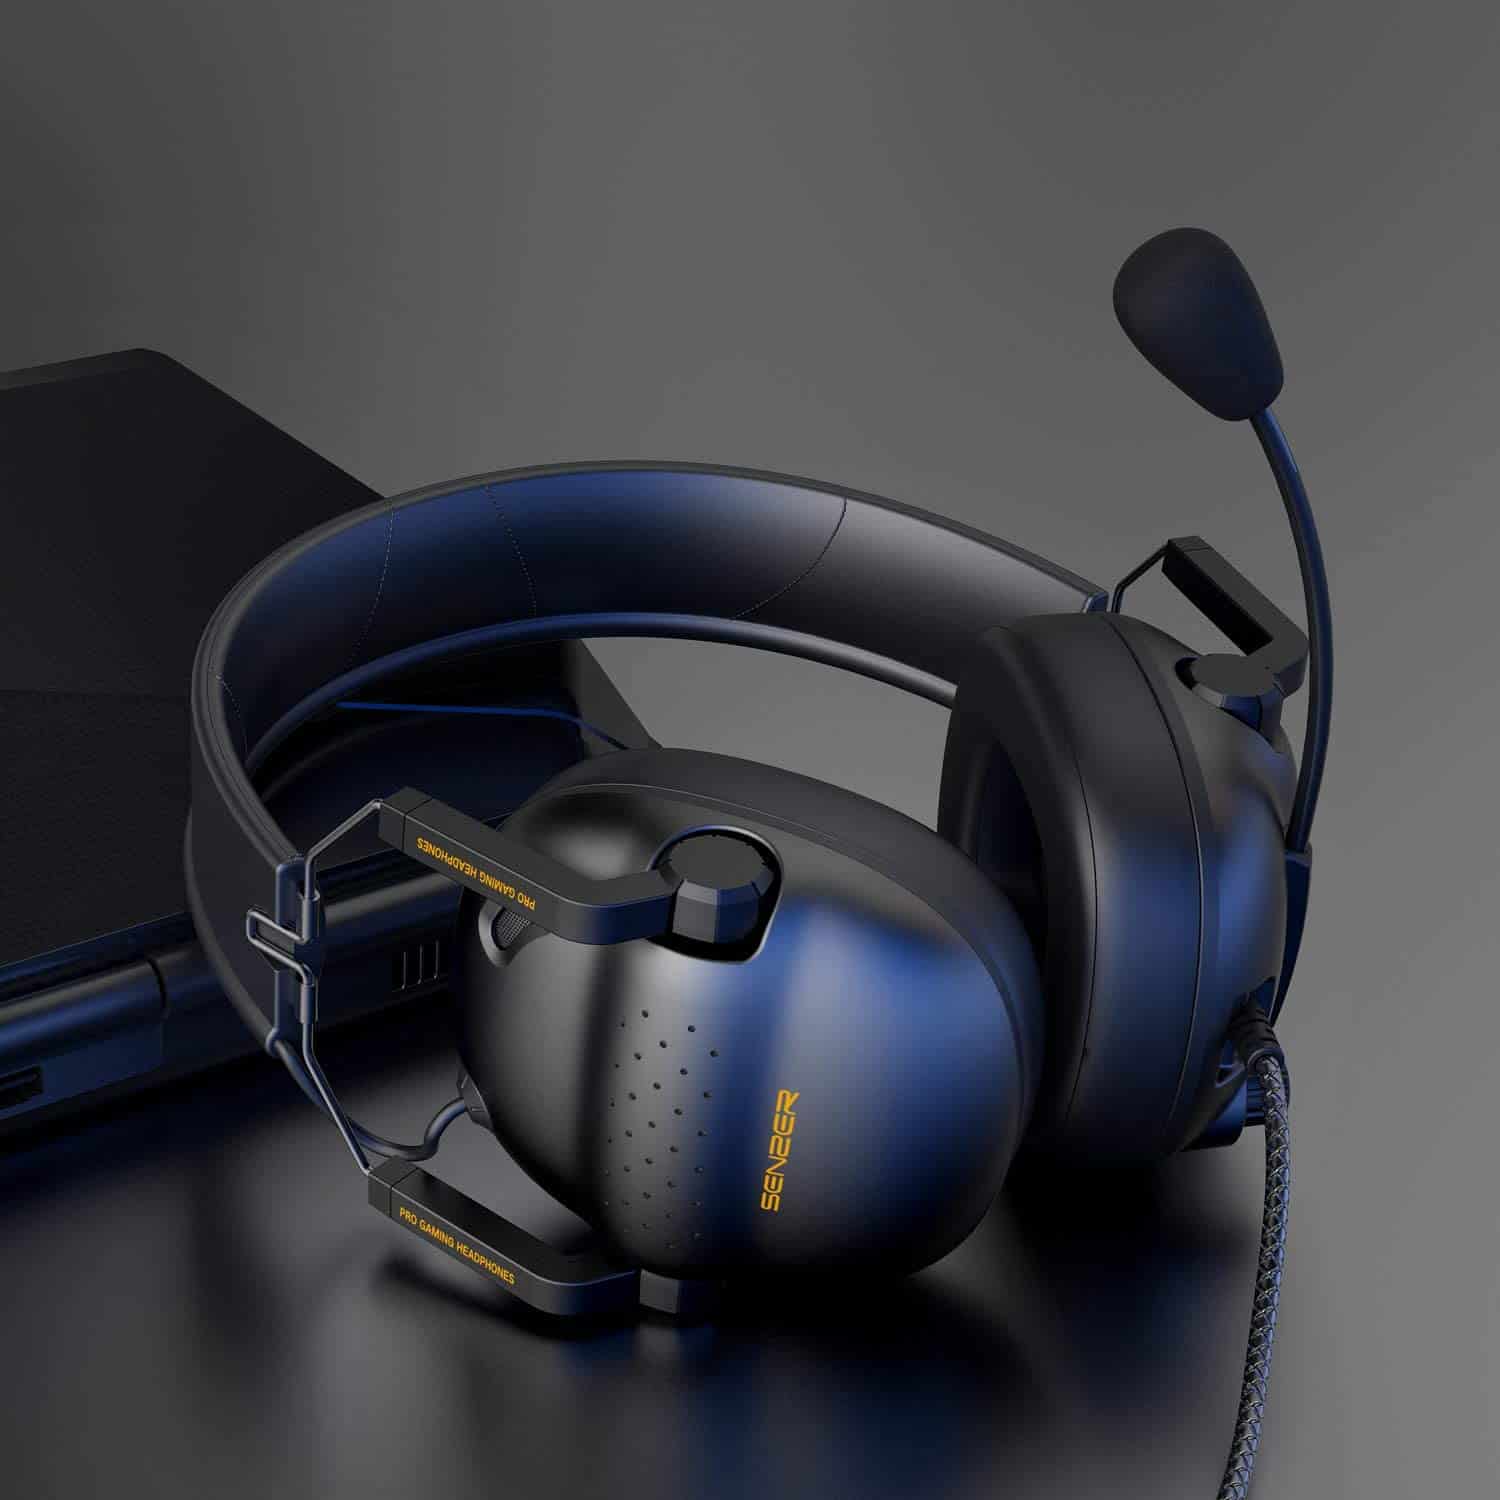 Best Sony Gaming Headsets in 2023